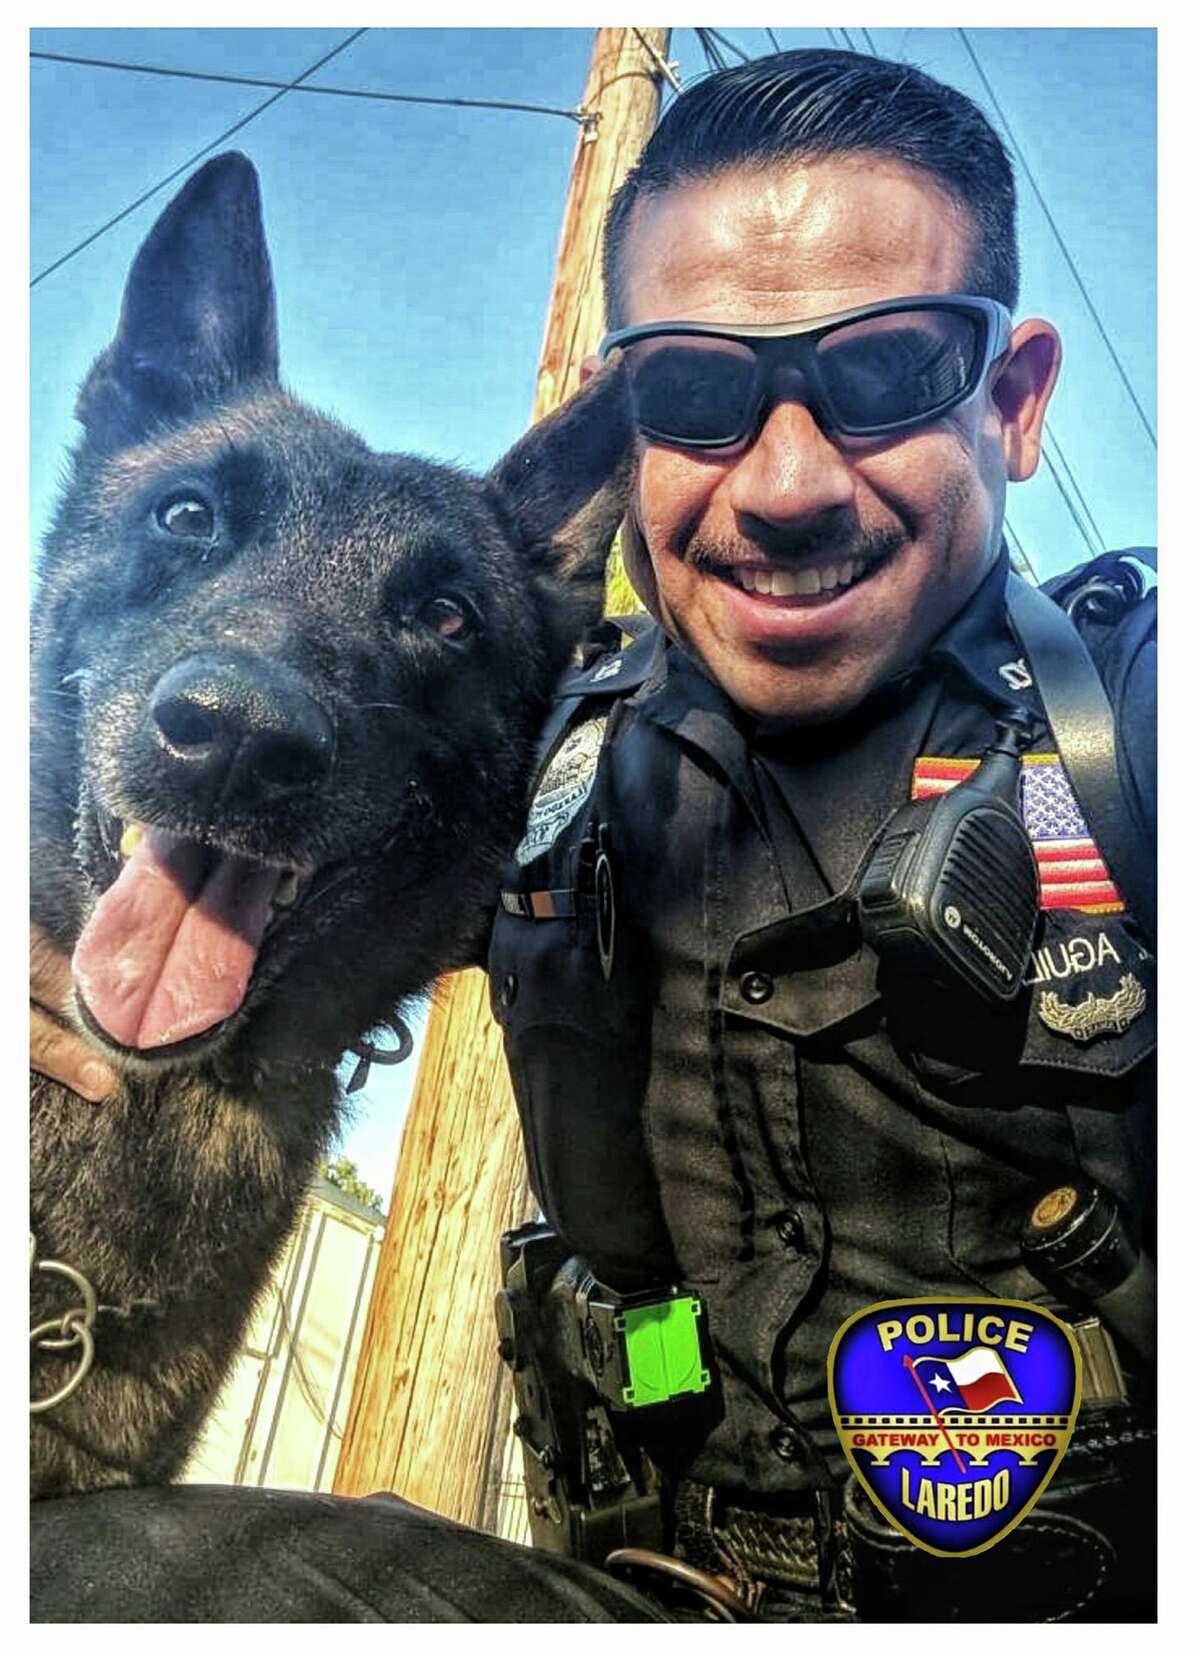 The Laredo Police Department announced the death of retired K-9 officer Drako on Wednesday saying the dog which served from 2012-18 died of natural causes.